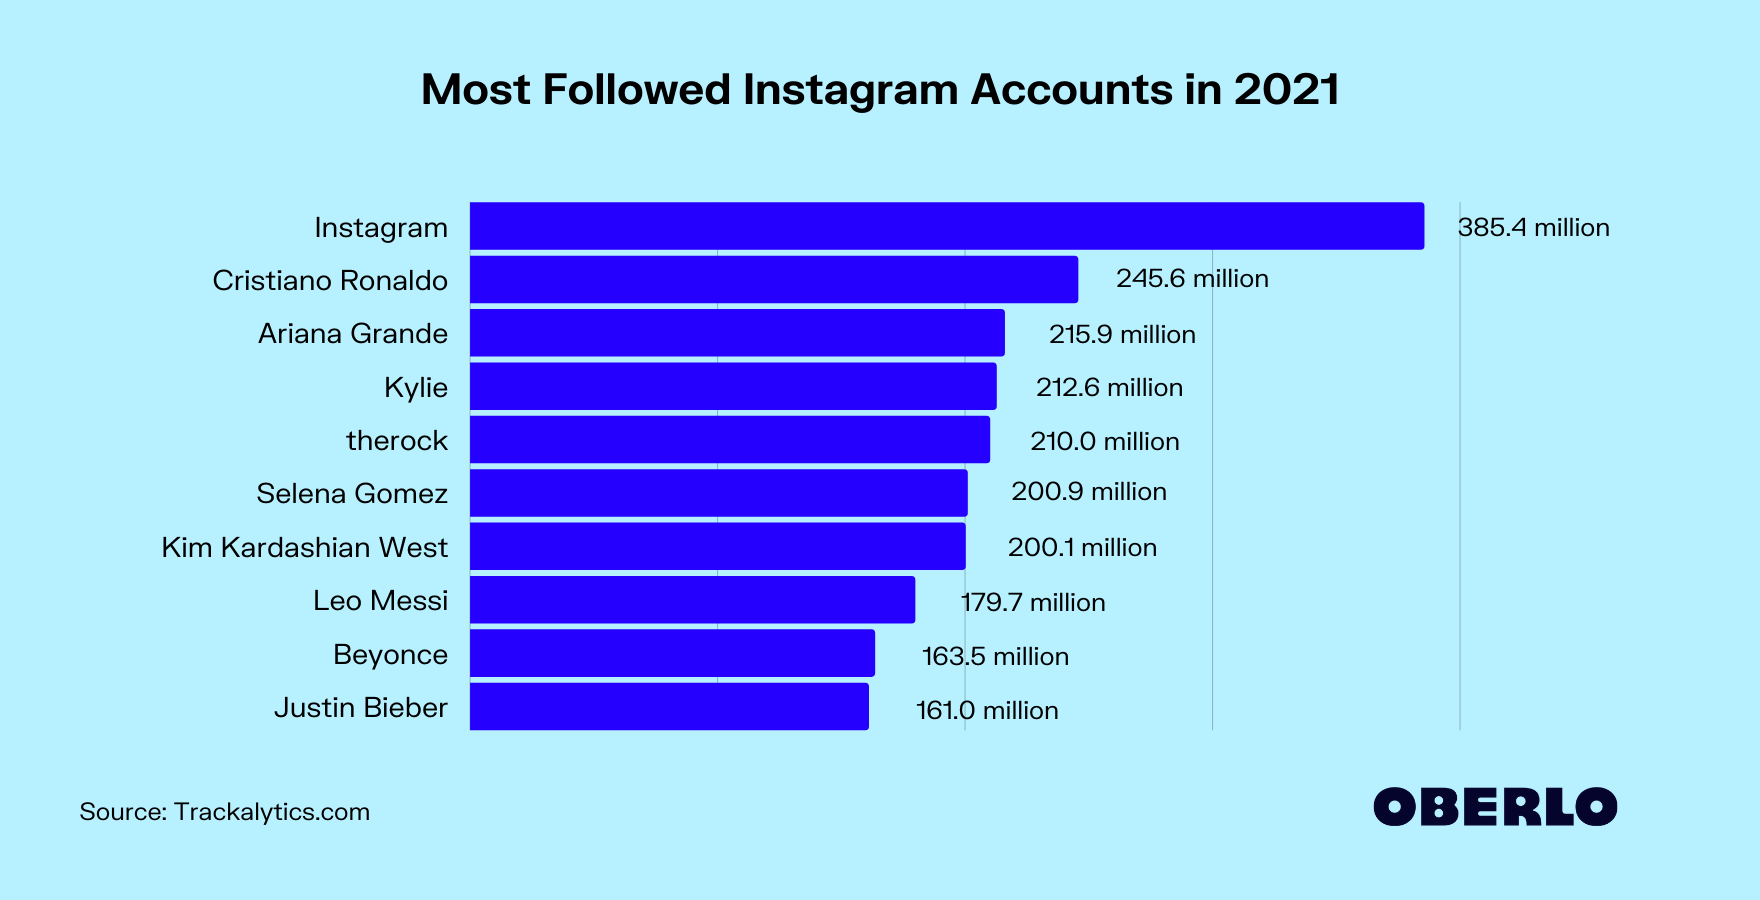 Who Has the Most Followers on Instagram in 2021? [Feb 2021]